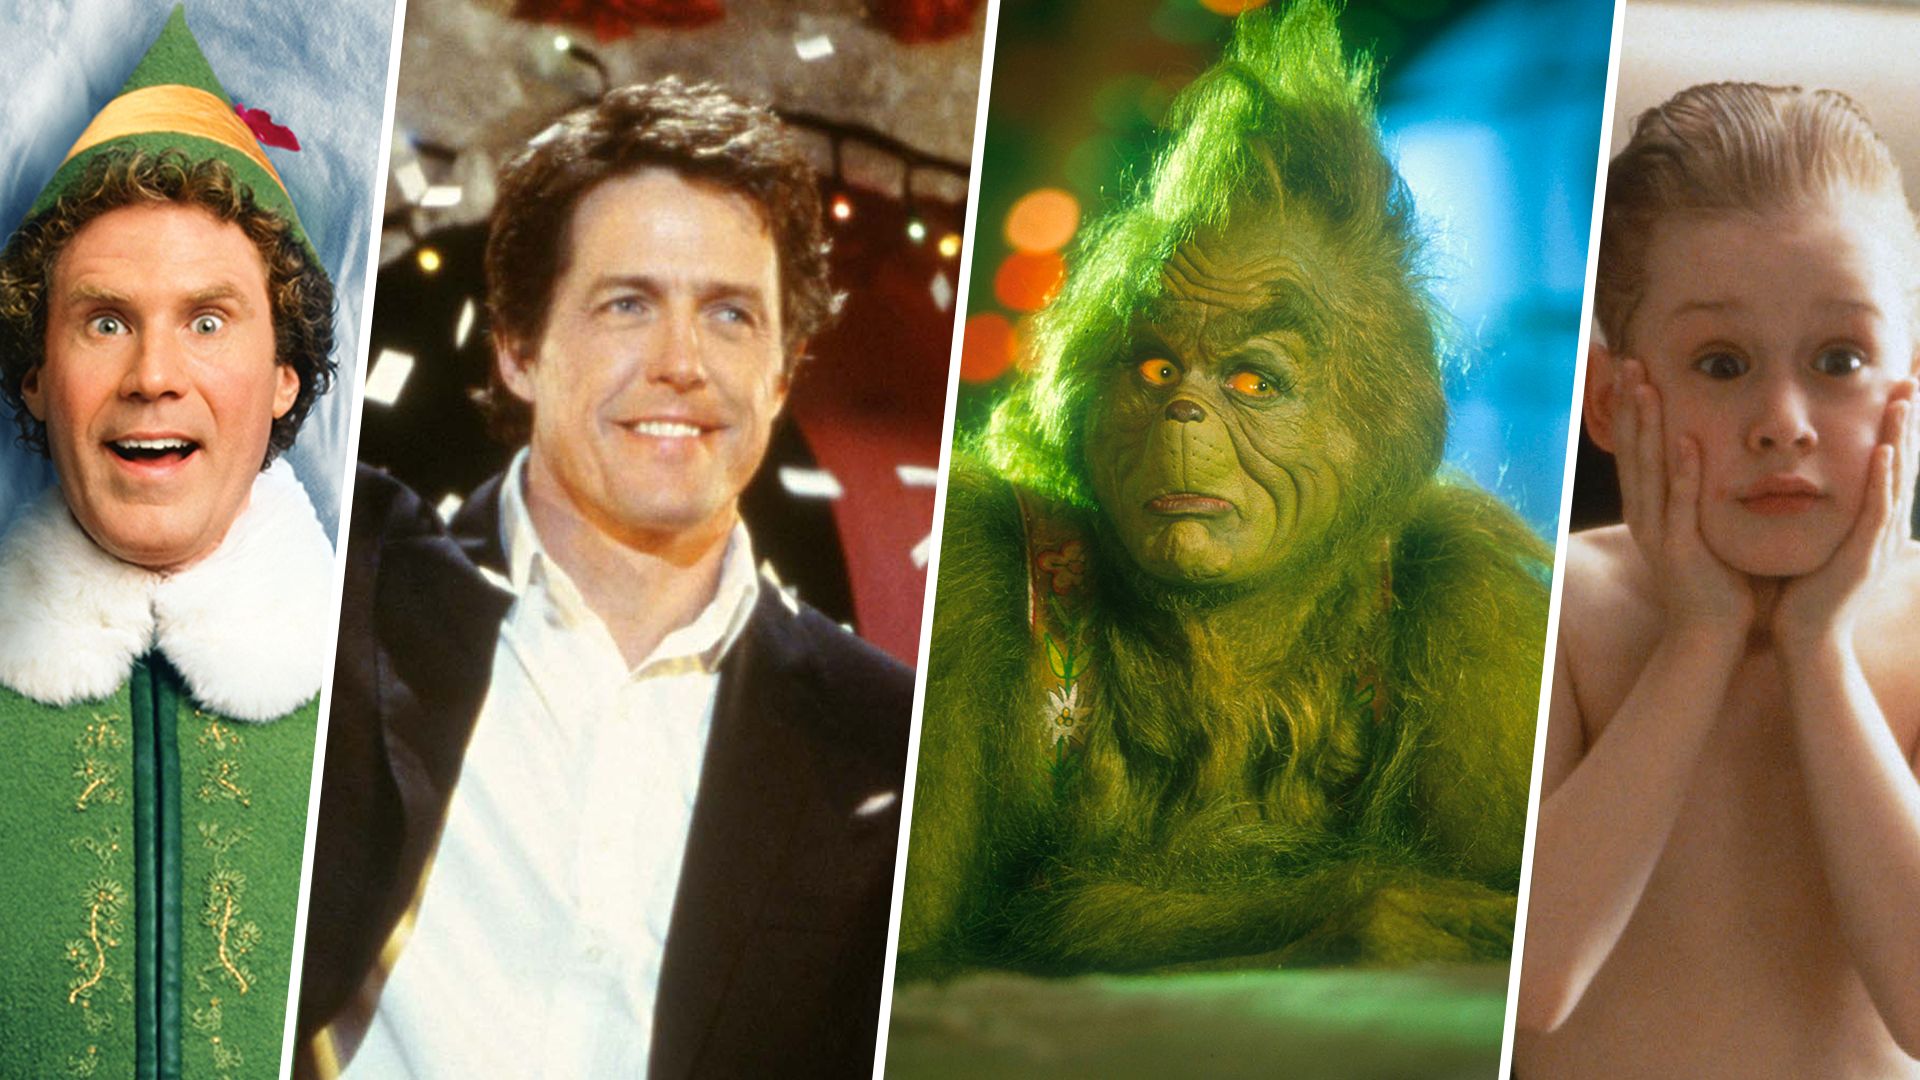 Split image - Will Ferrel in Elf, Hugh Grant in Love Actually, The Grinch and Macaulay Culkin in Home Alone